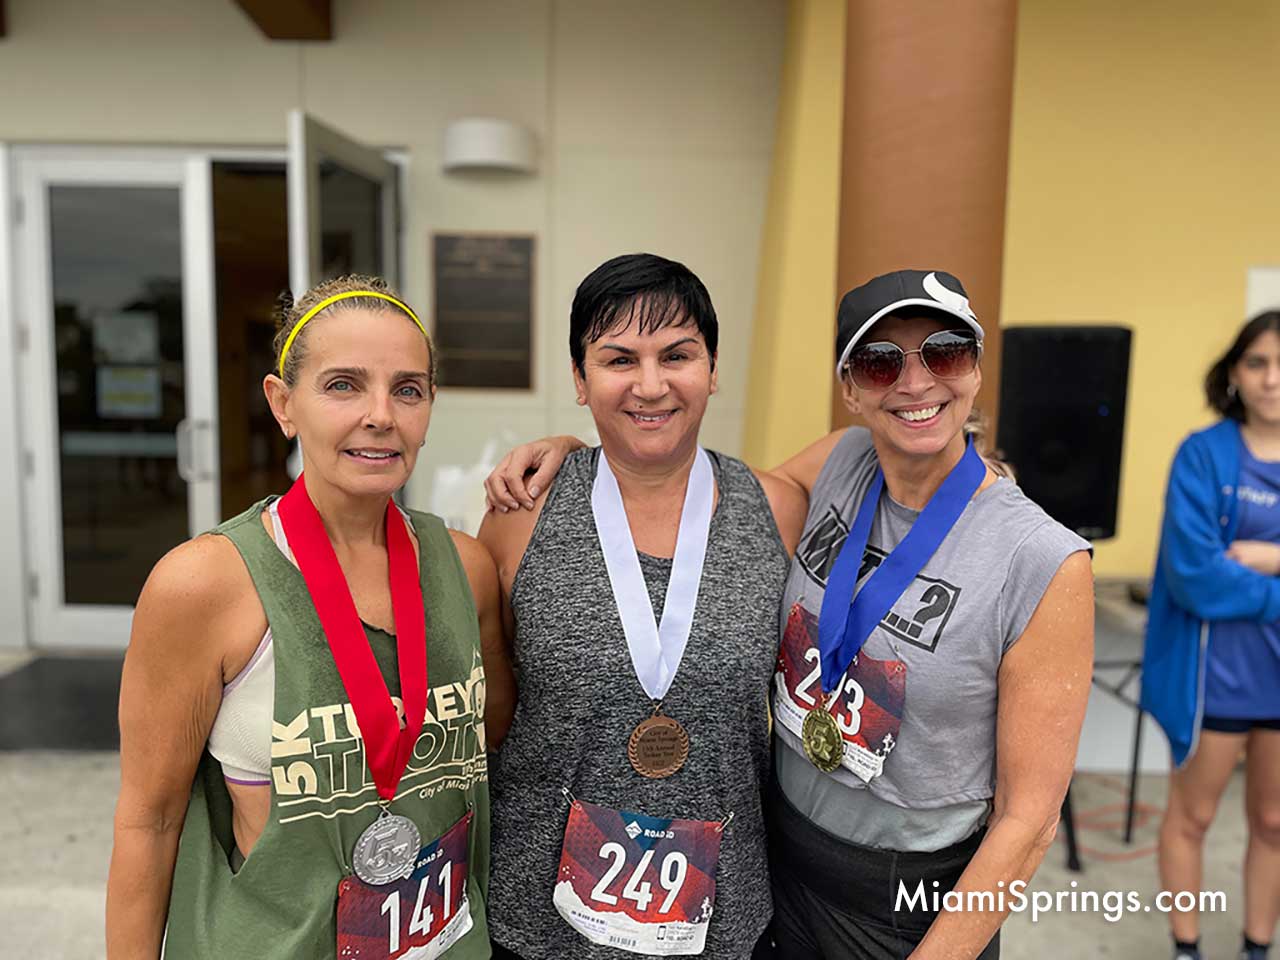 Elizabeth Coton Barrera, Rosa Valdes, and Kim Currie at the Miami Springs Turkey Trot